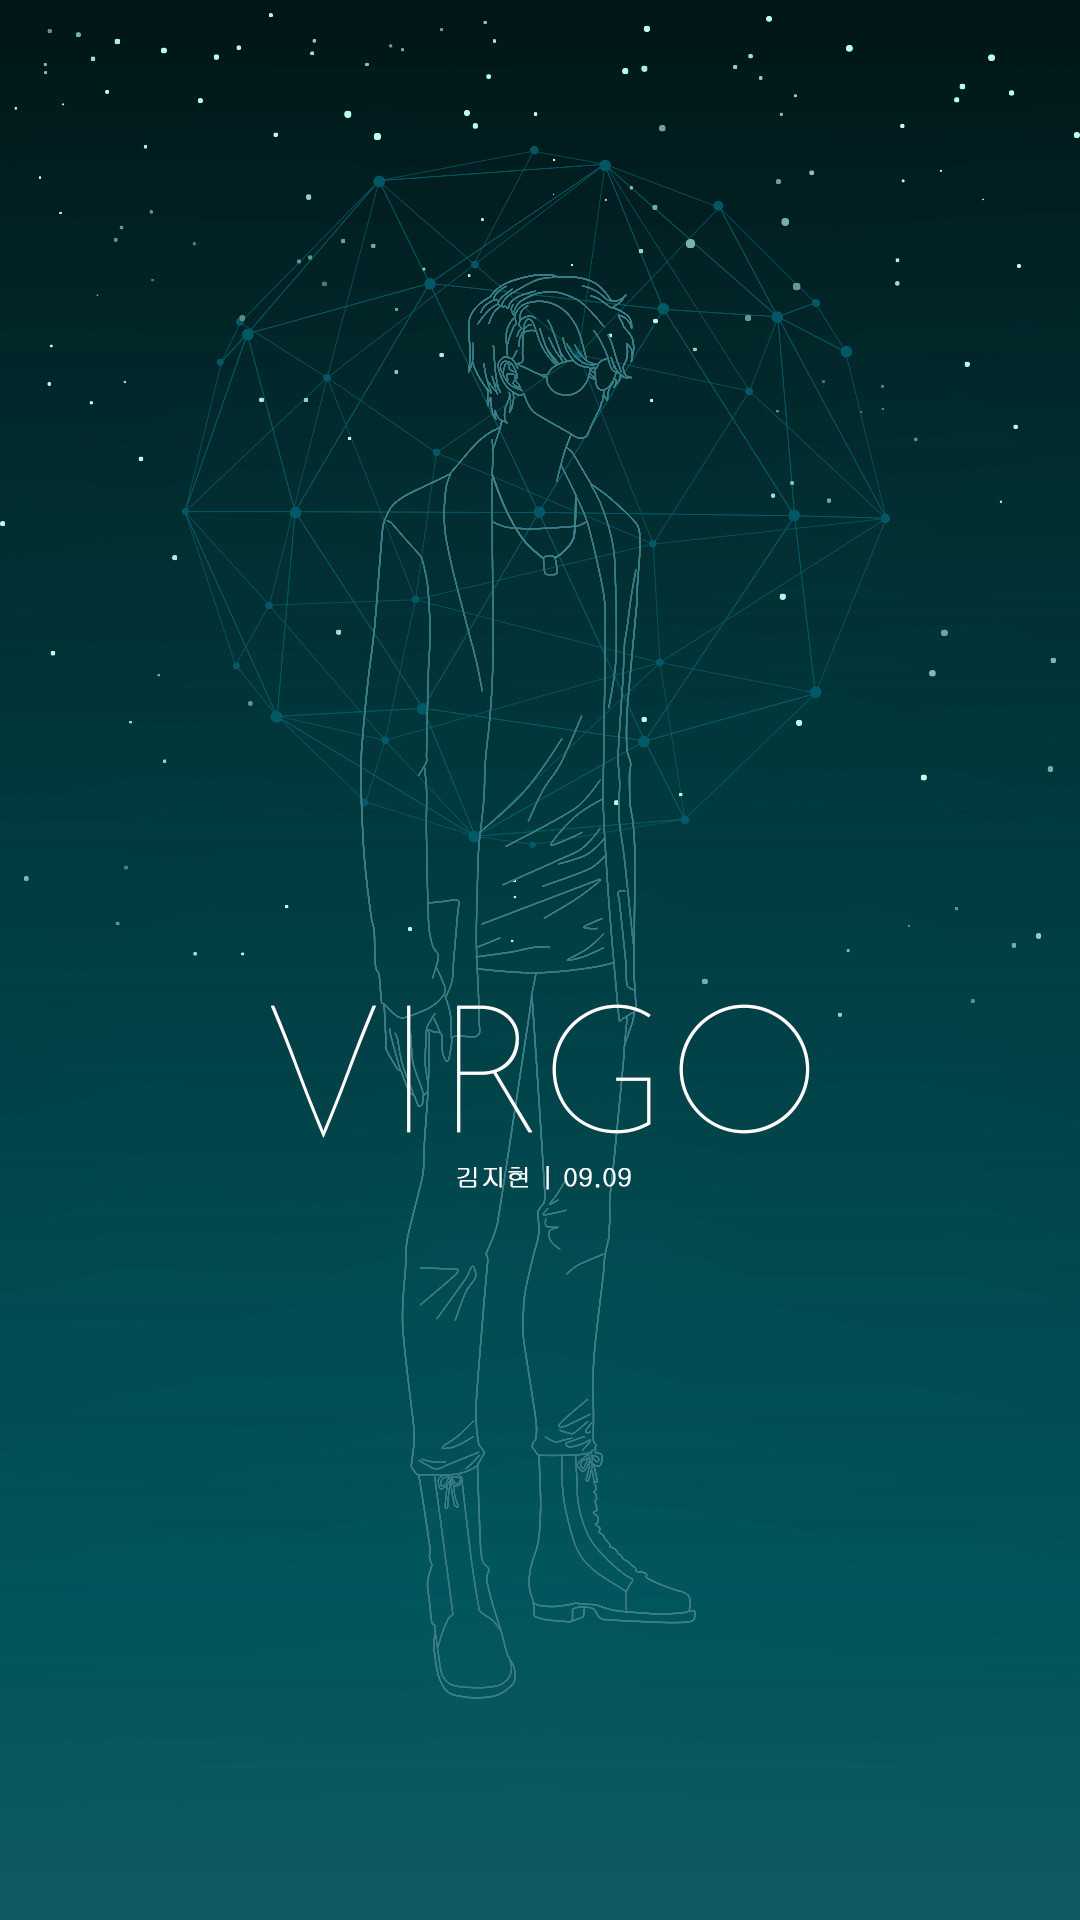 Virgo wallpaper for phone with beautiful design and image of a man - Virgo